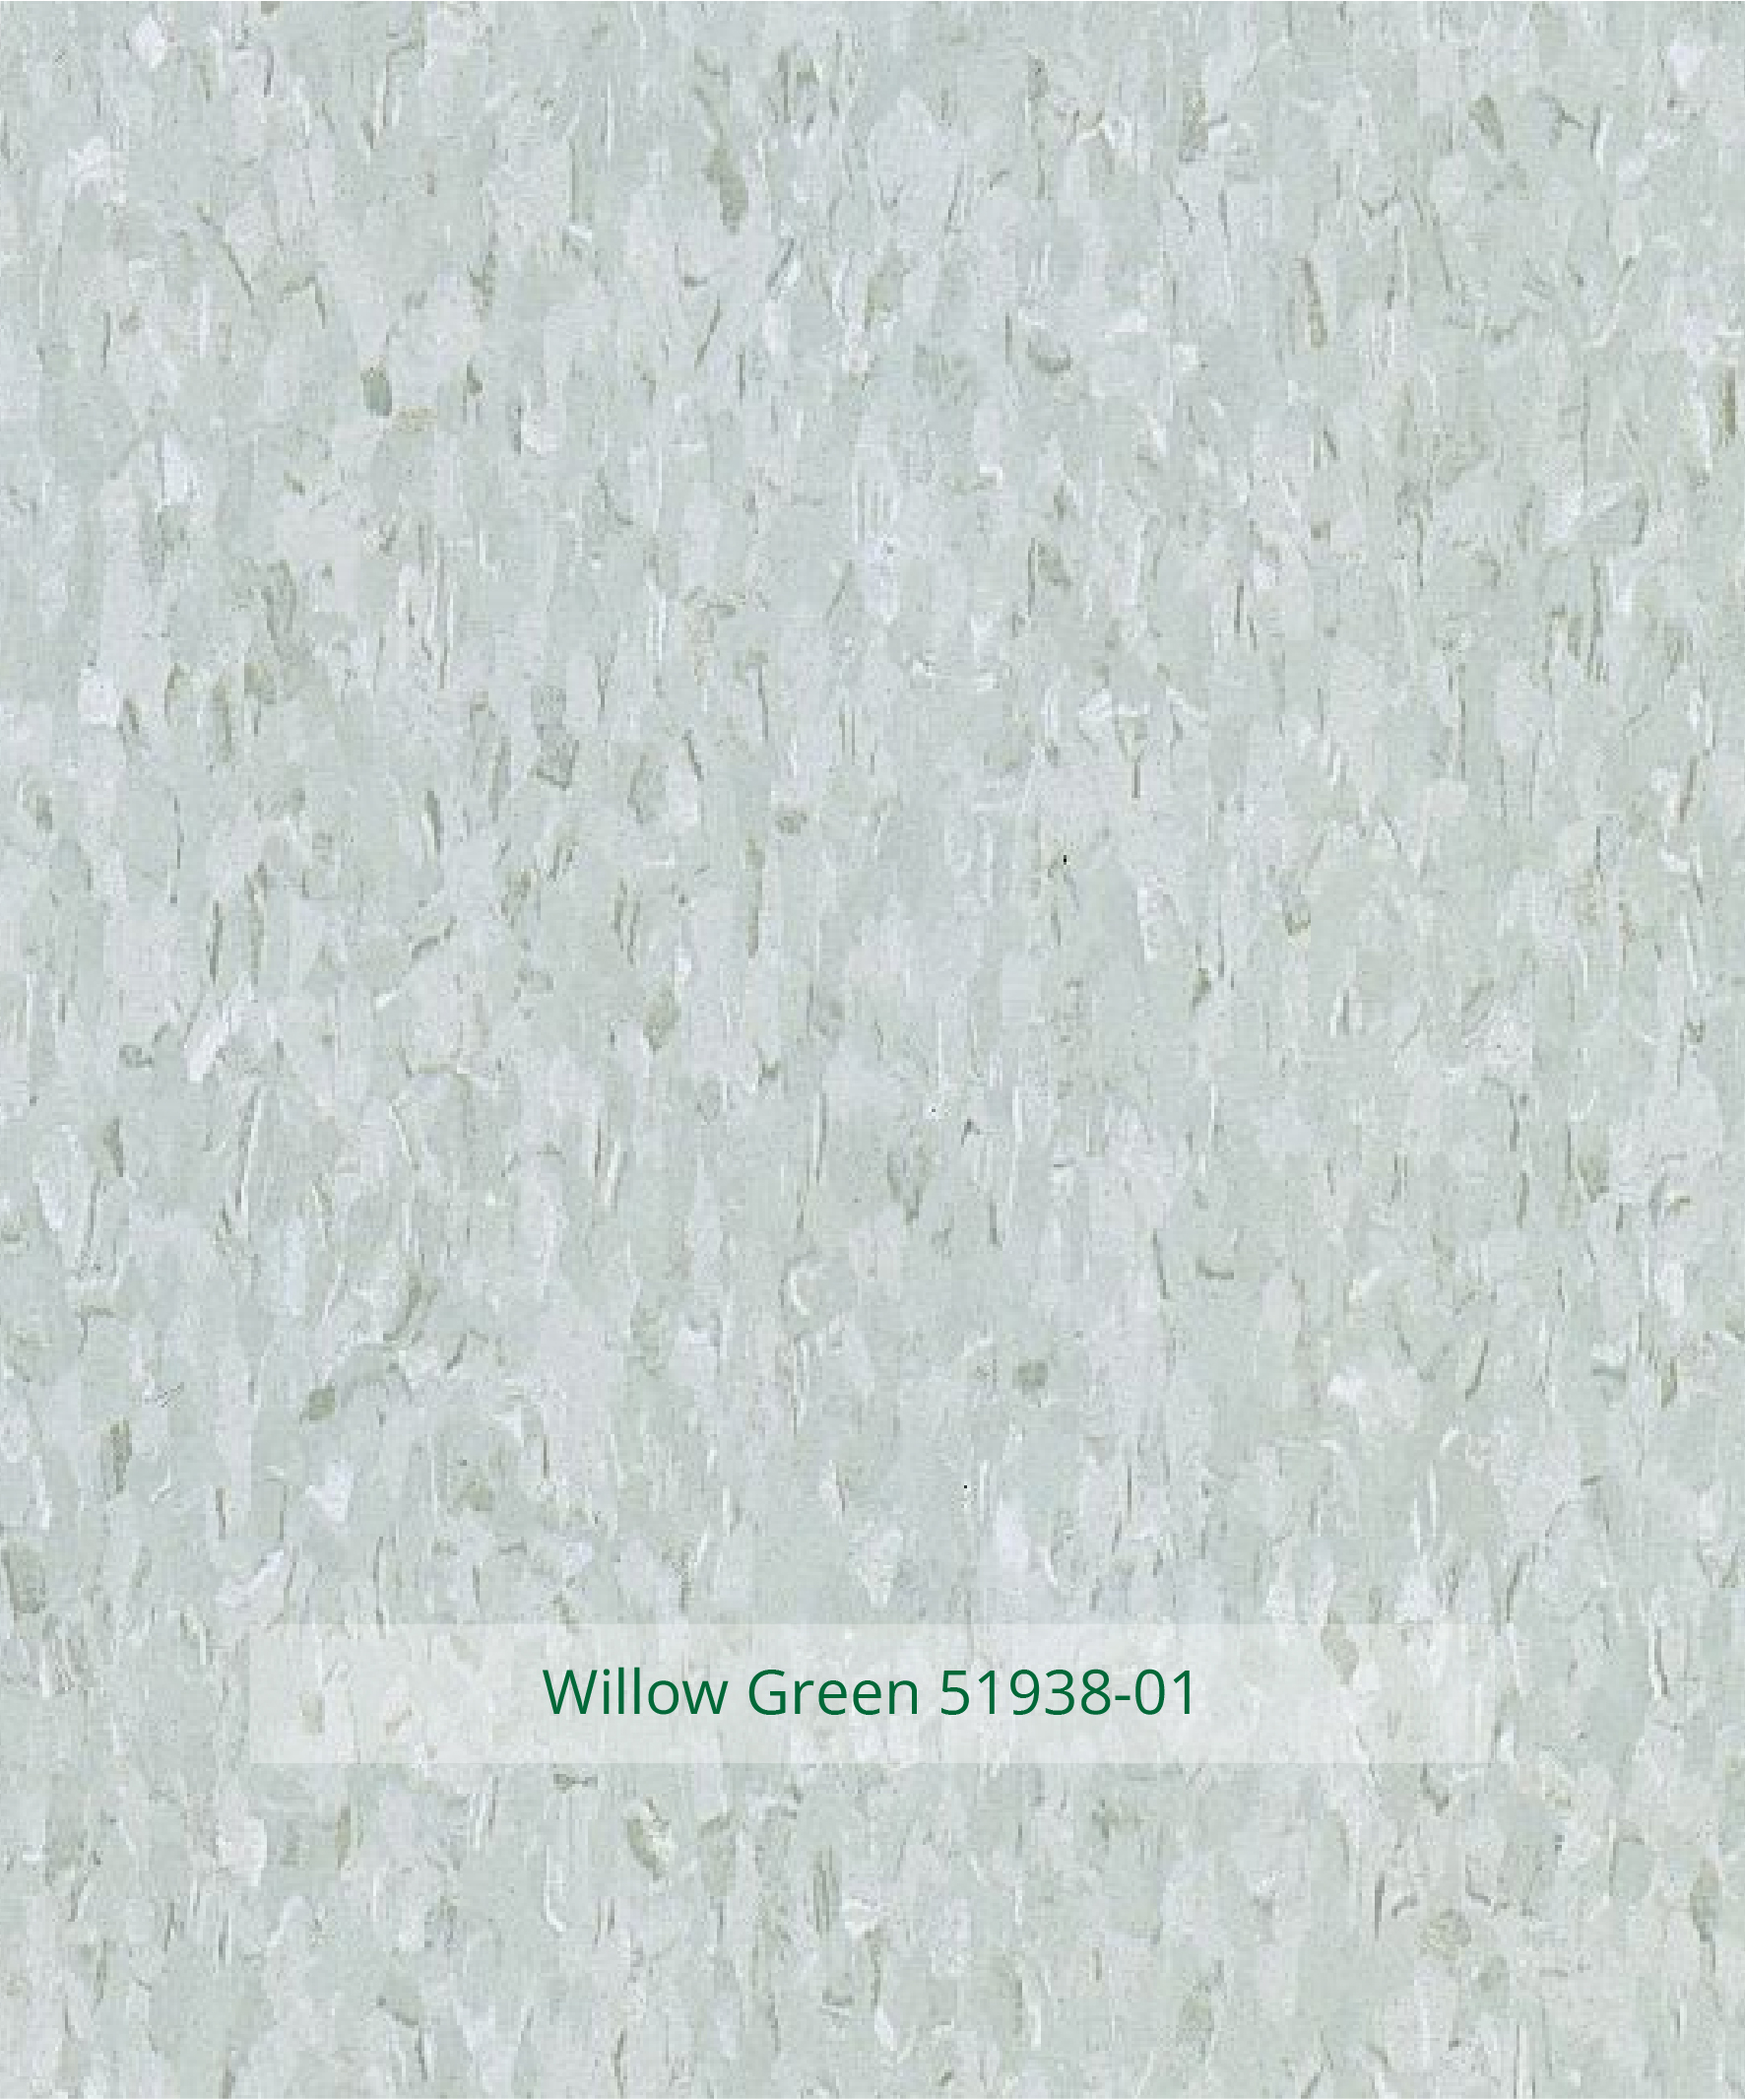 Standard EXCELON Imperial Series Willow Green 51938 01a